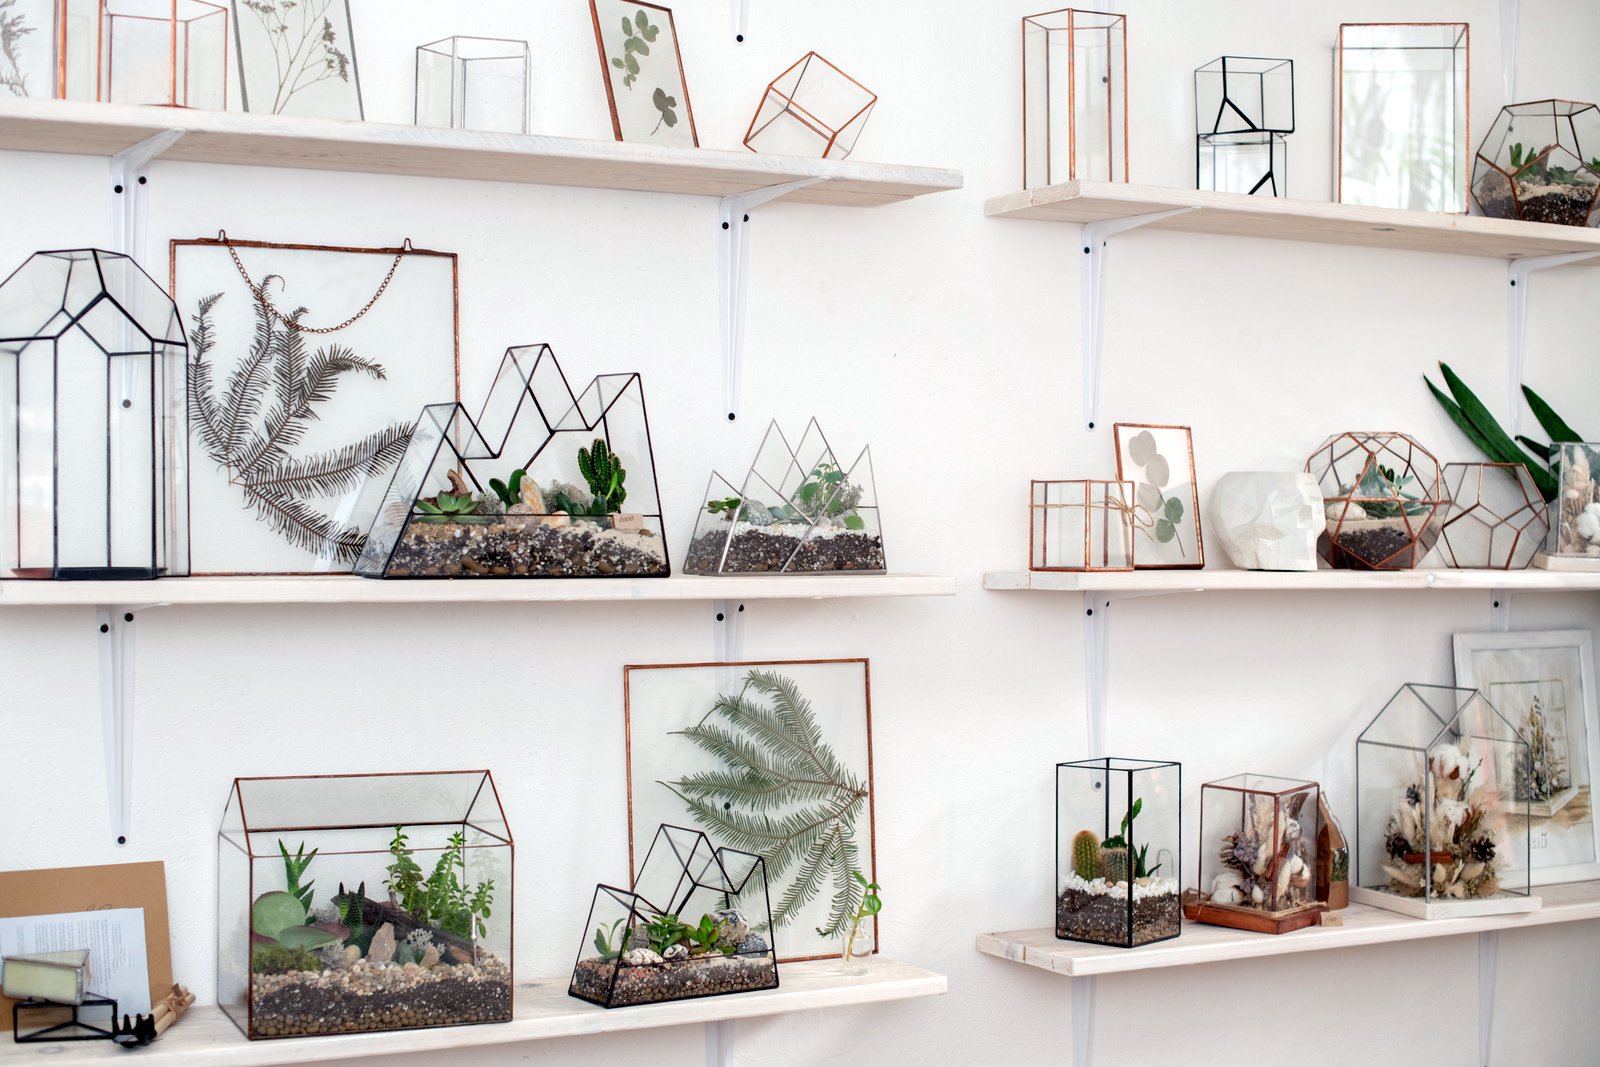 Indoor plants decorating: Succulents and other plants in glass cases on shelves